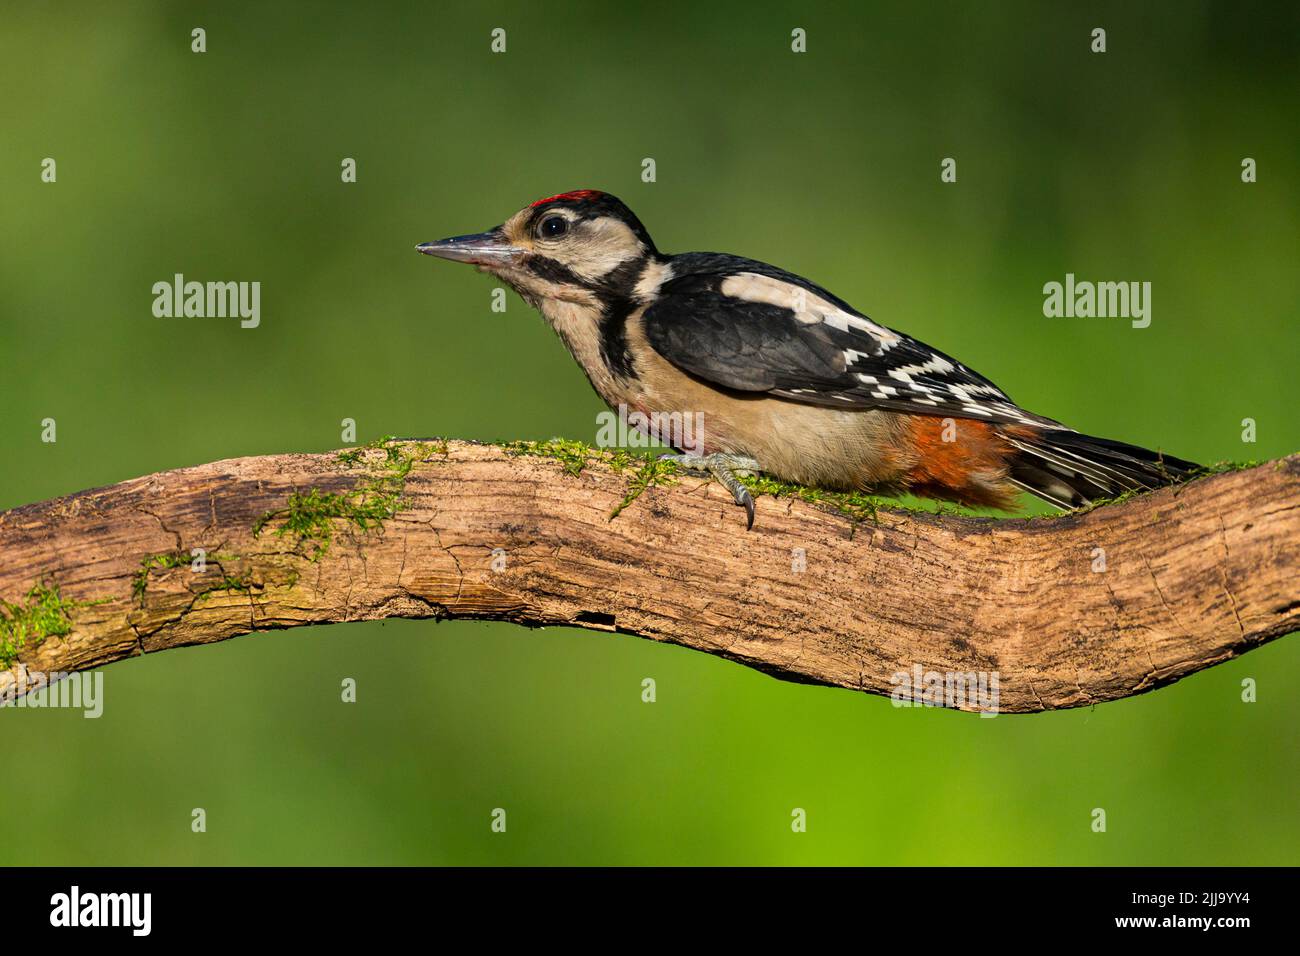 Great spotted woodpecker Dendrocopus major, juvenile perched on branch, Tiszaalpár, Hungary, June Stock Photo